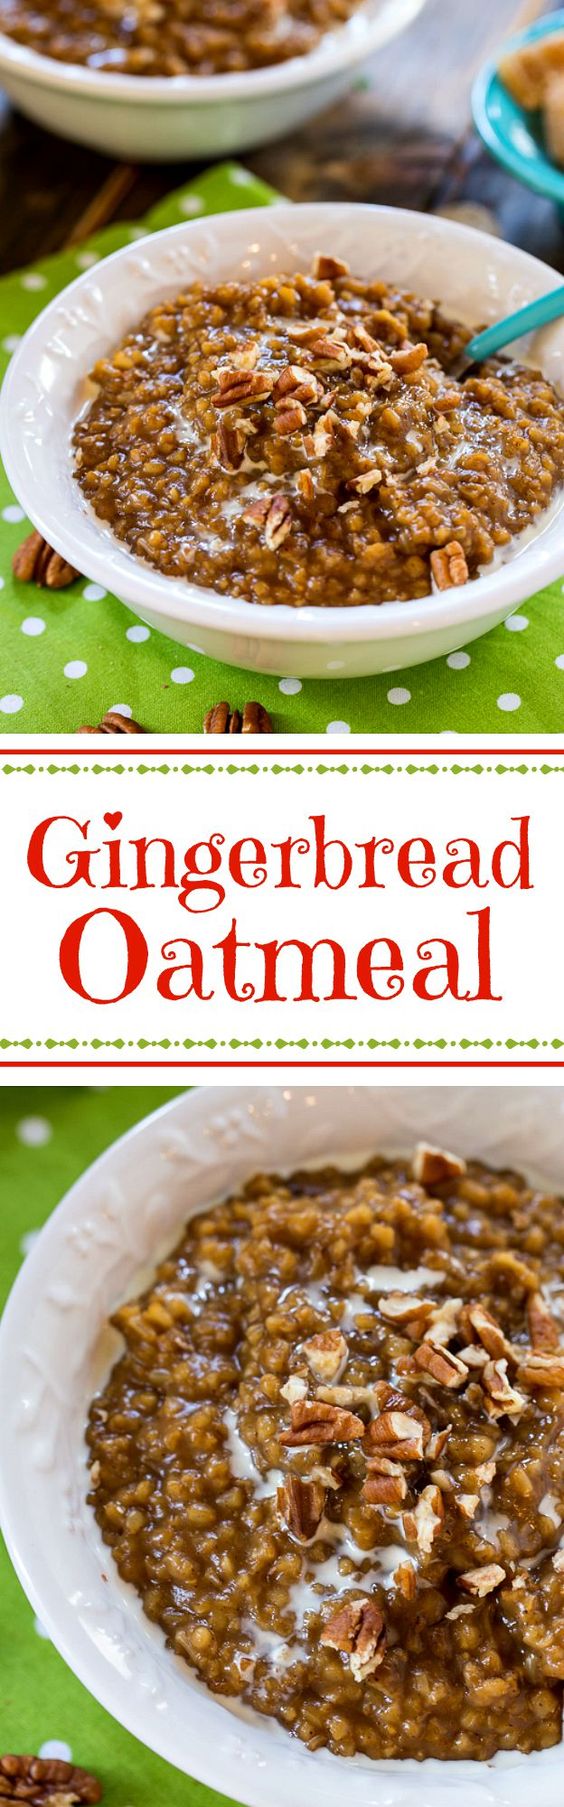 Gingerbread Oatmeal- With a quick boil in the evening, these gingerbread flavored steel-cut oats can be made in a jiffy the next morning.